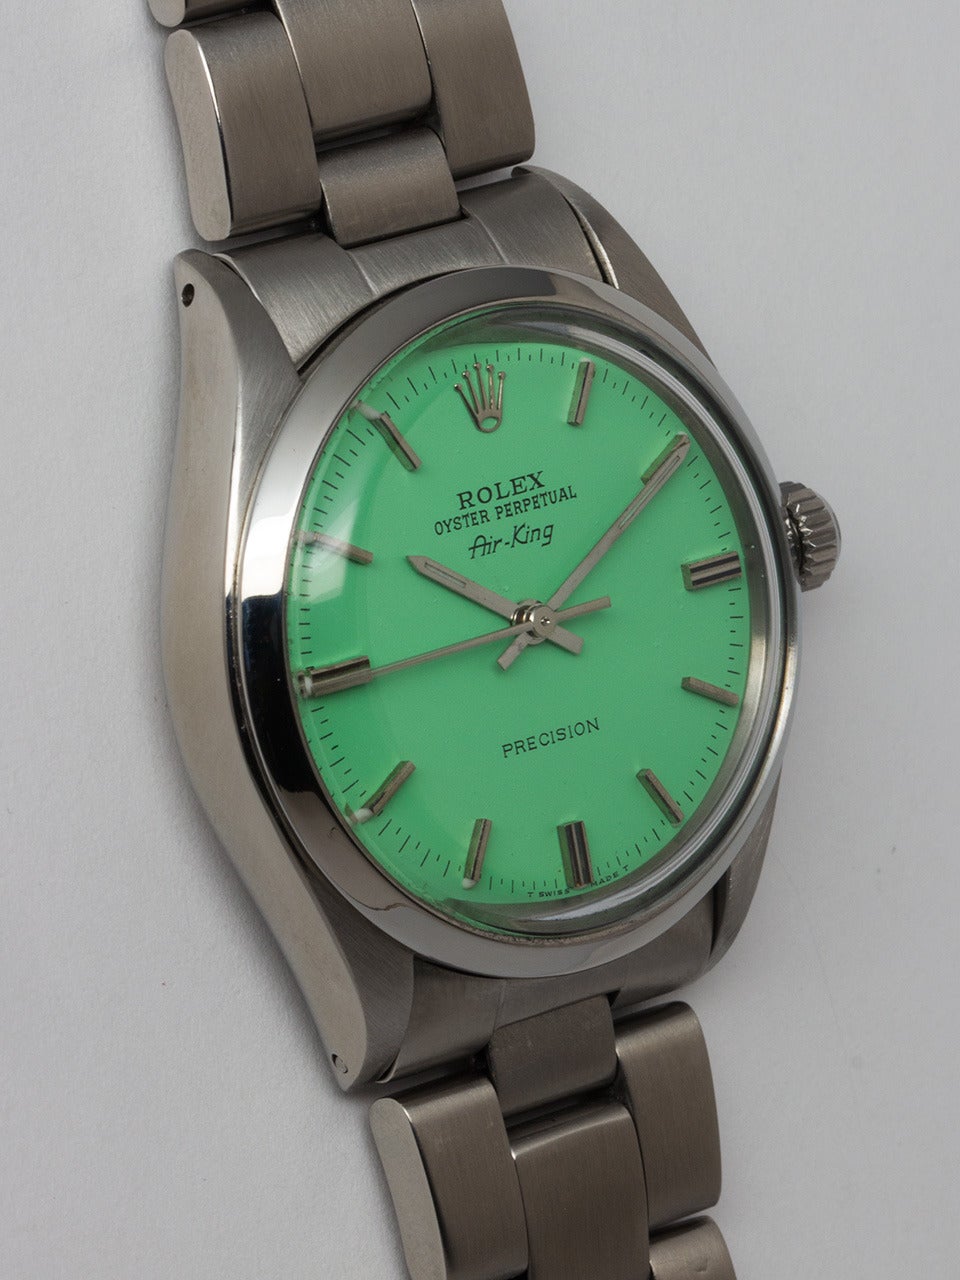 Rolex Stainless Steel Airking Wristwatch ref 5500 serial# 3.9 million circa 1974. 34mm Oyster case with smooth bezel and acrylic crystal. Bright custom colored Mint Green dial with applied silver indexes and hands. Powered by caliber 1520 self